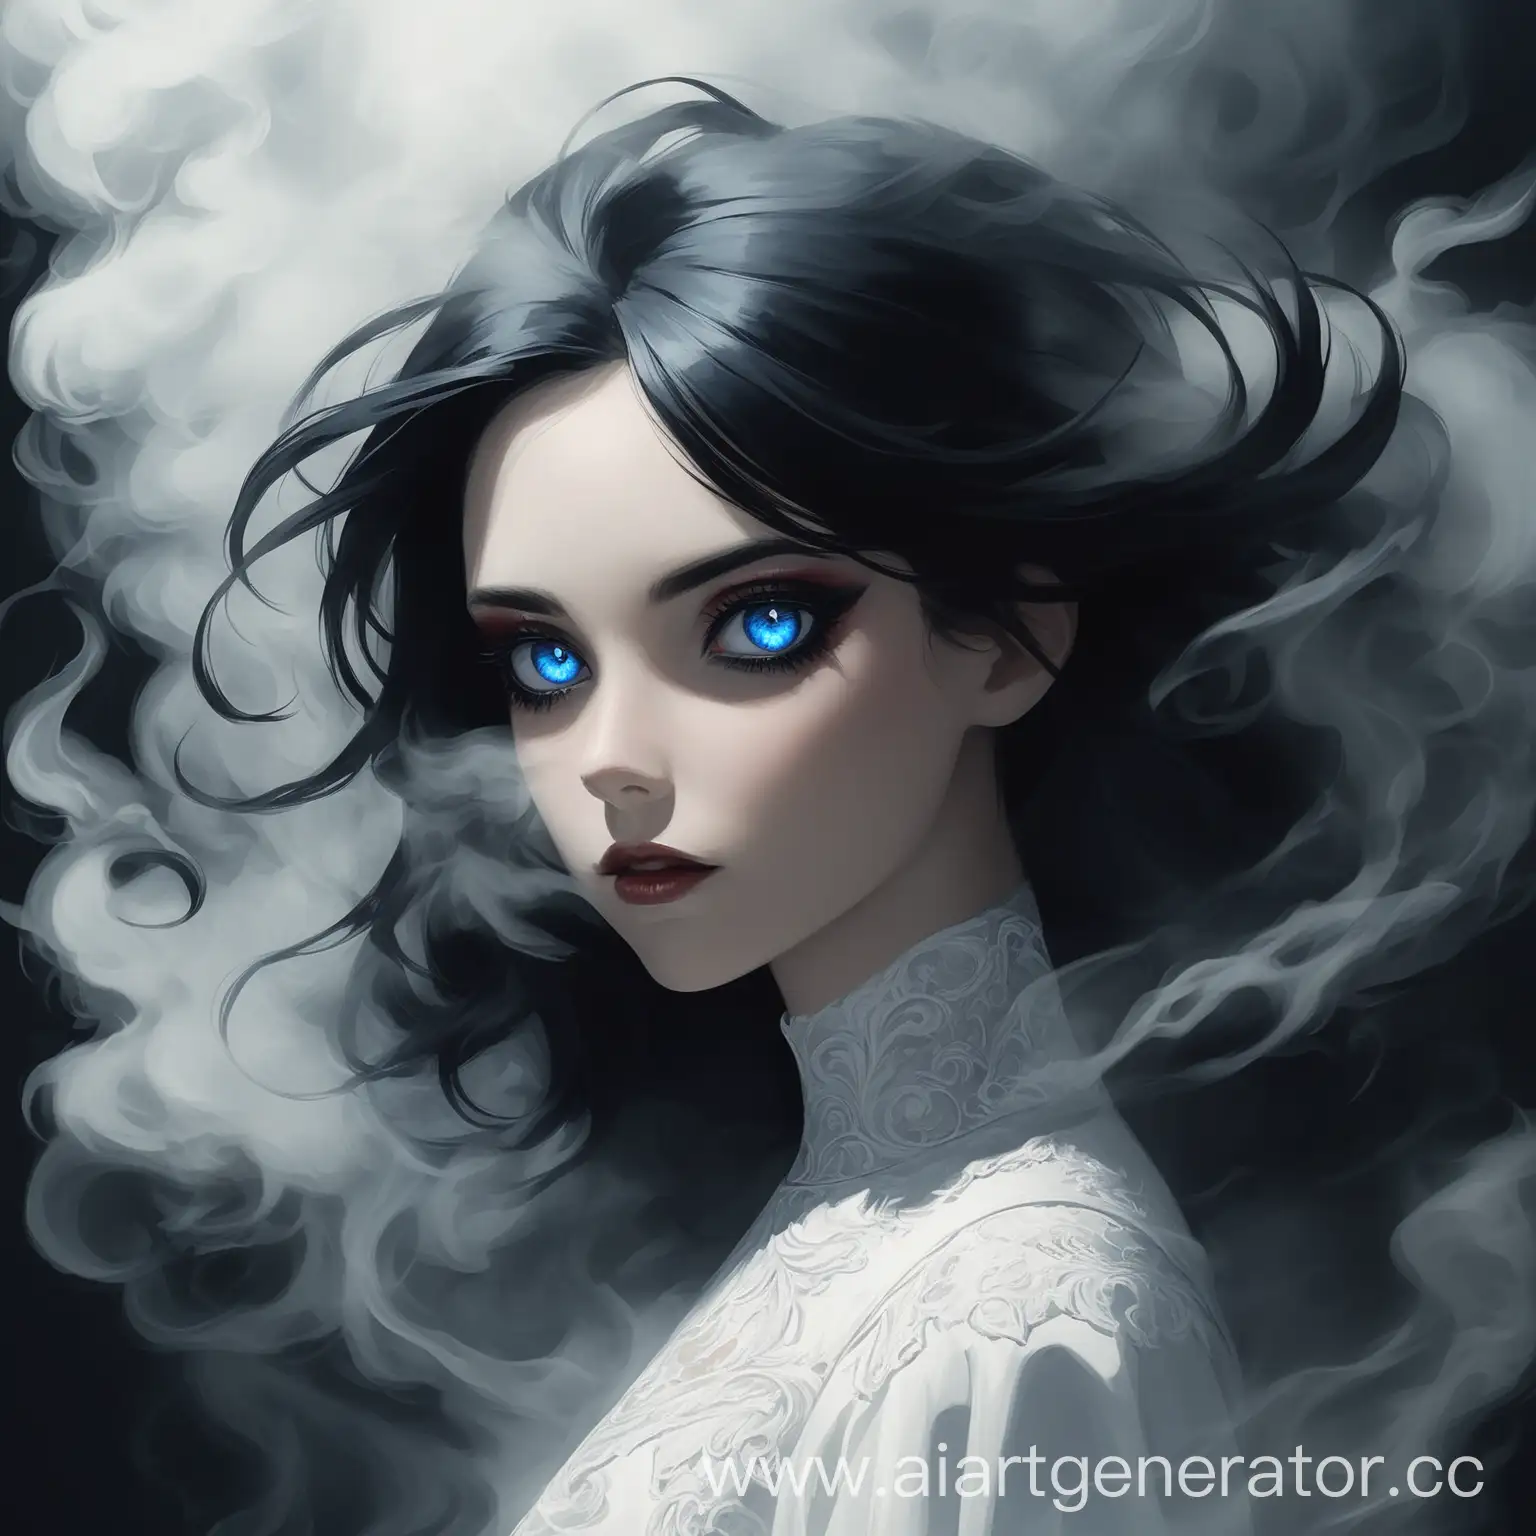 Ethereal-Beauty-Serene-Girl-with-Black-Hair-and-Blue-Eyes-in-White-Dress-Amidst-Smoke